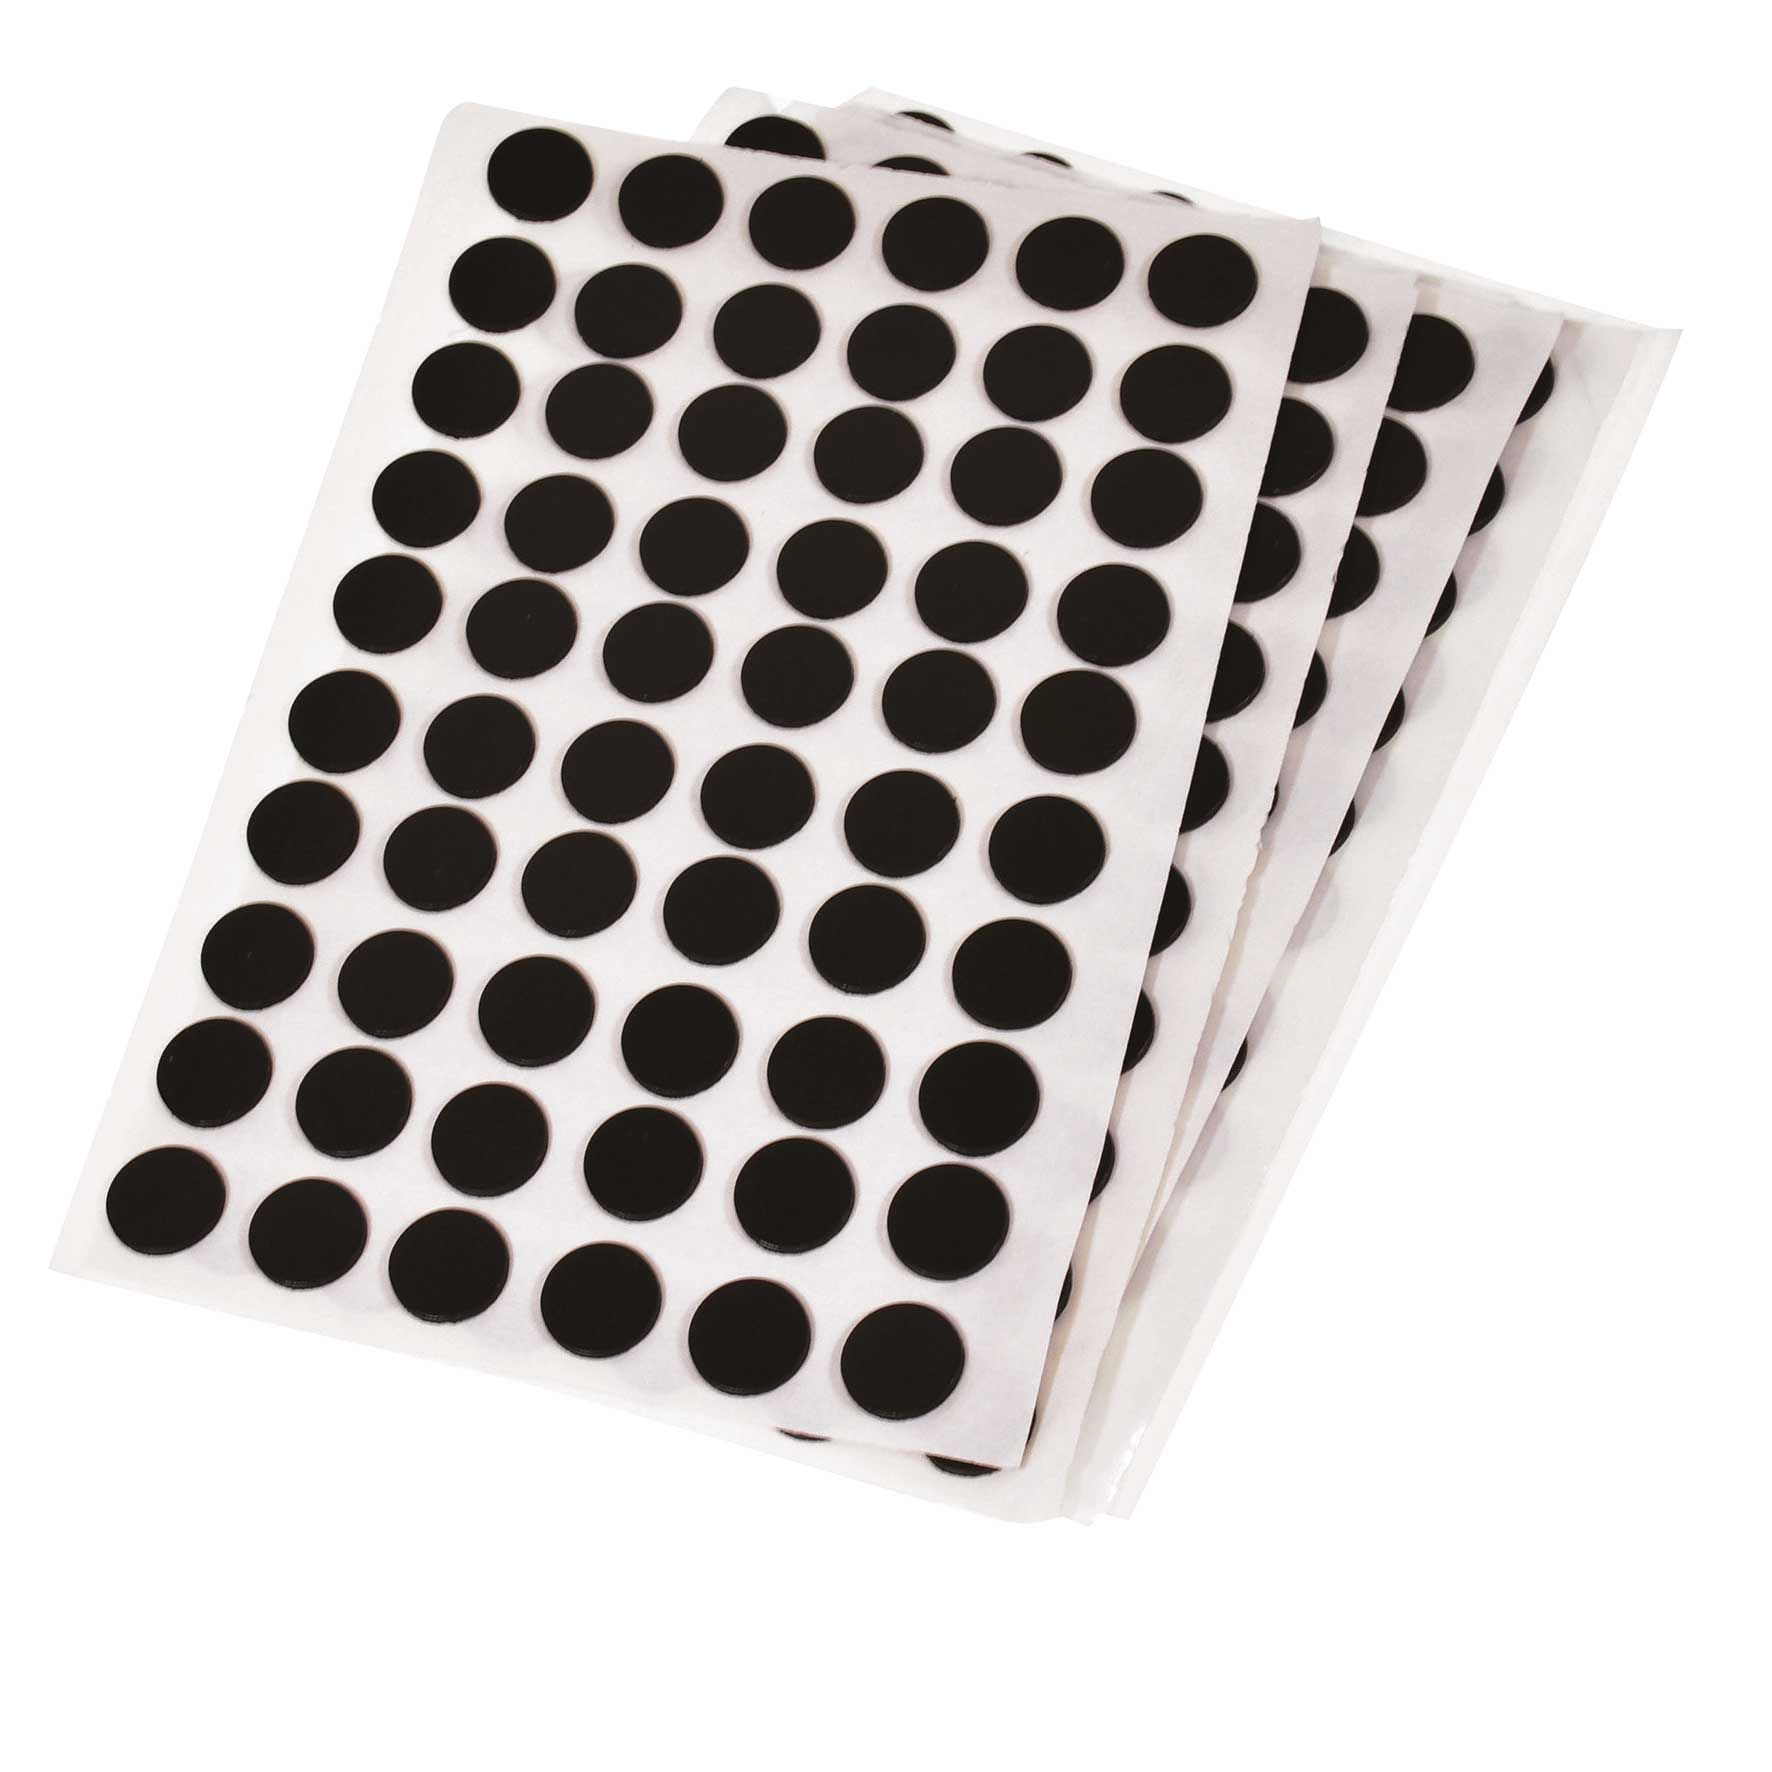 MagDots Adhesive Backed 12mm Diameter - Pack of 300